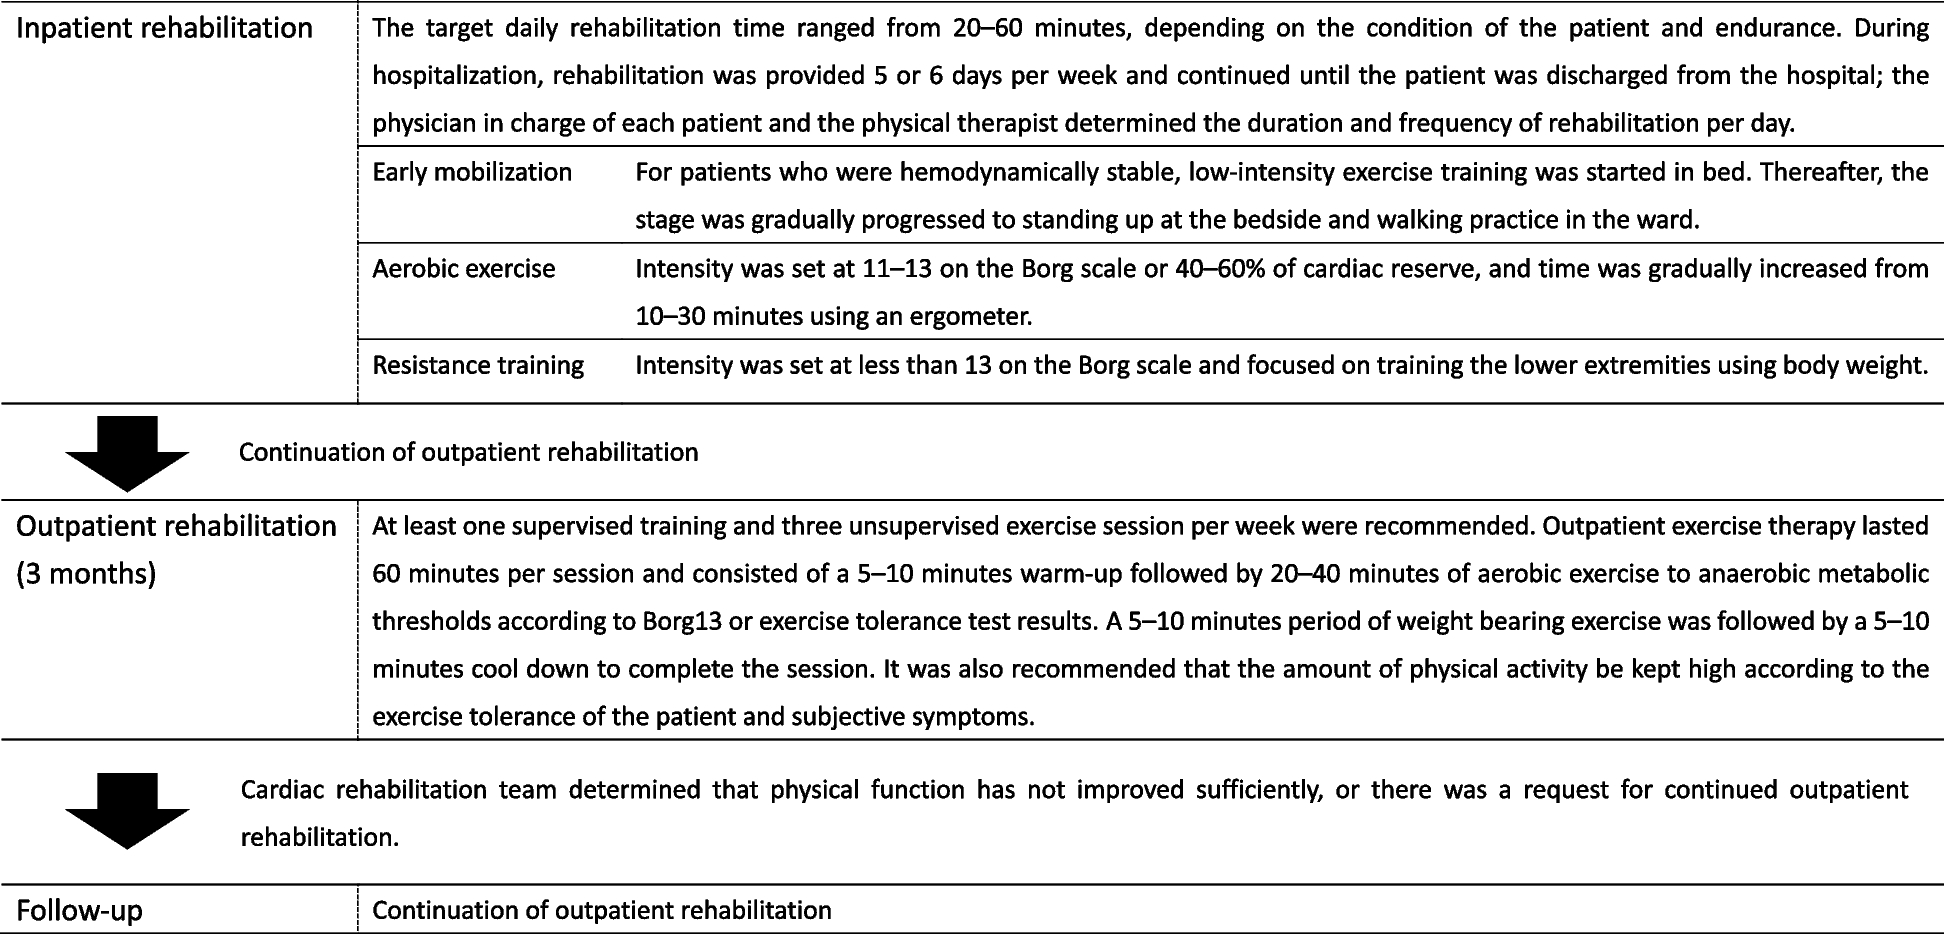 Effect of rehabilitation on renal outcomes after acute kidney injury associated with cardiovascular disease: a retrospective analysis